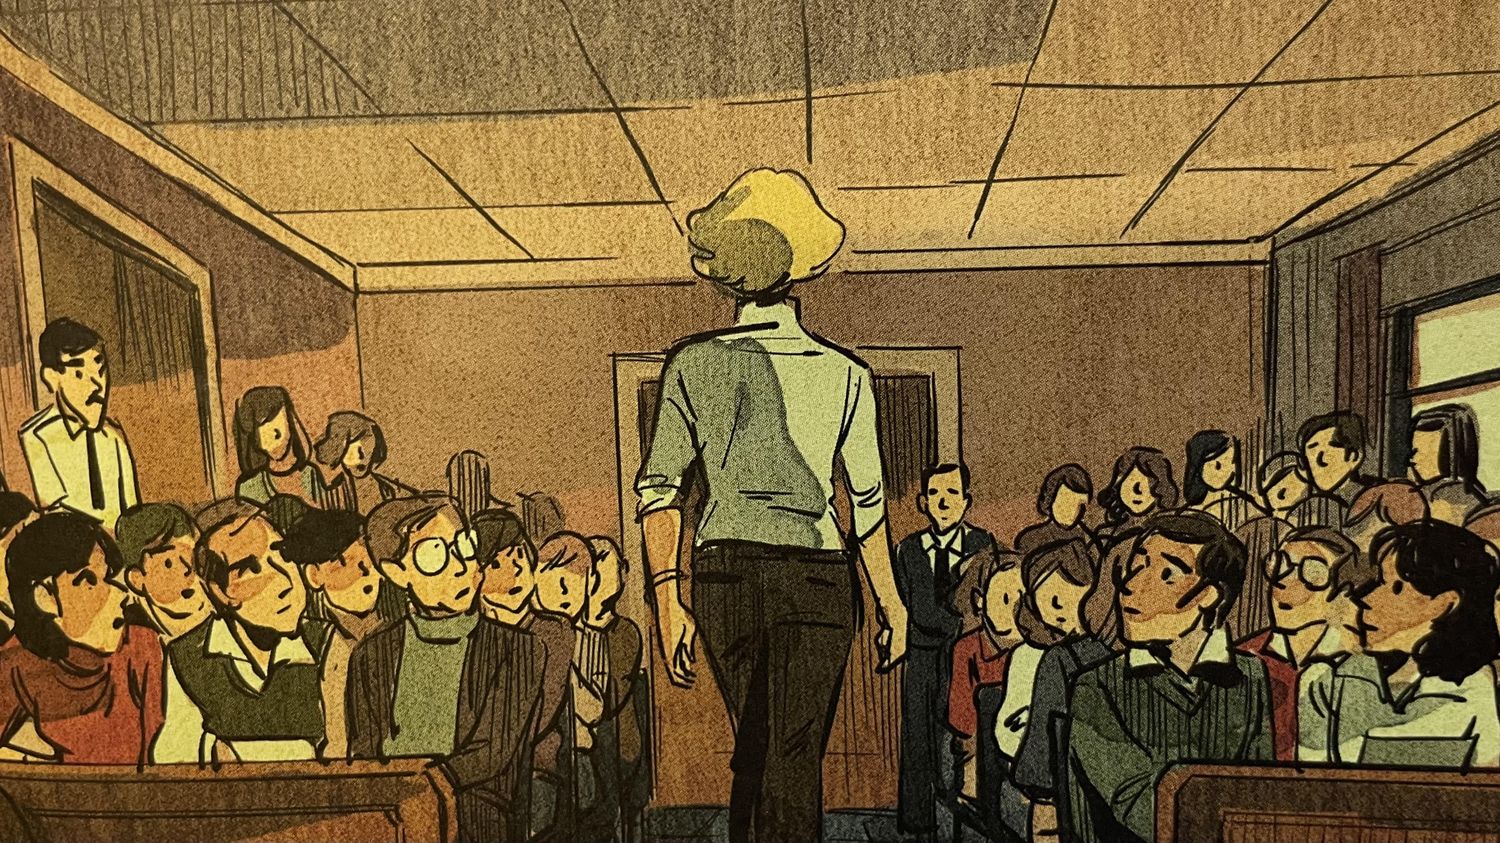 "Bobigny 1972": engaging graphic novel follows the trial that paved the way for the legalization of abortion